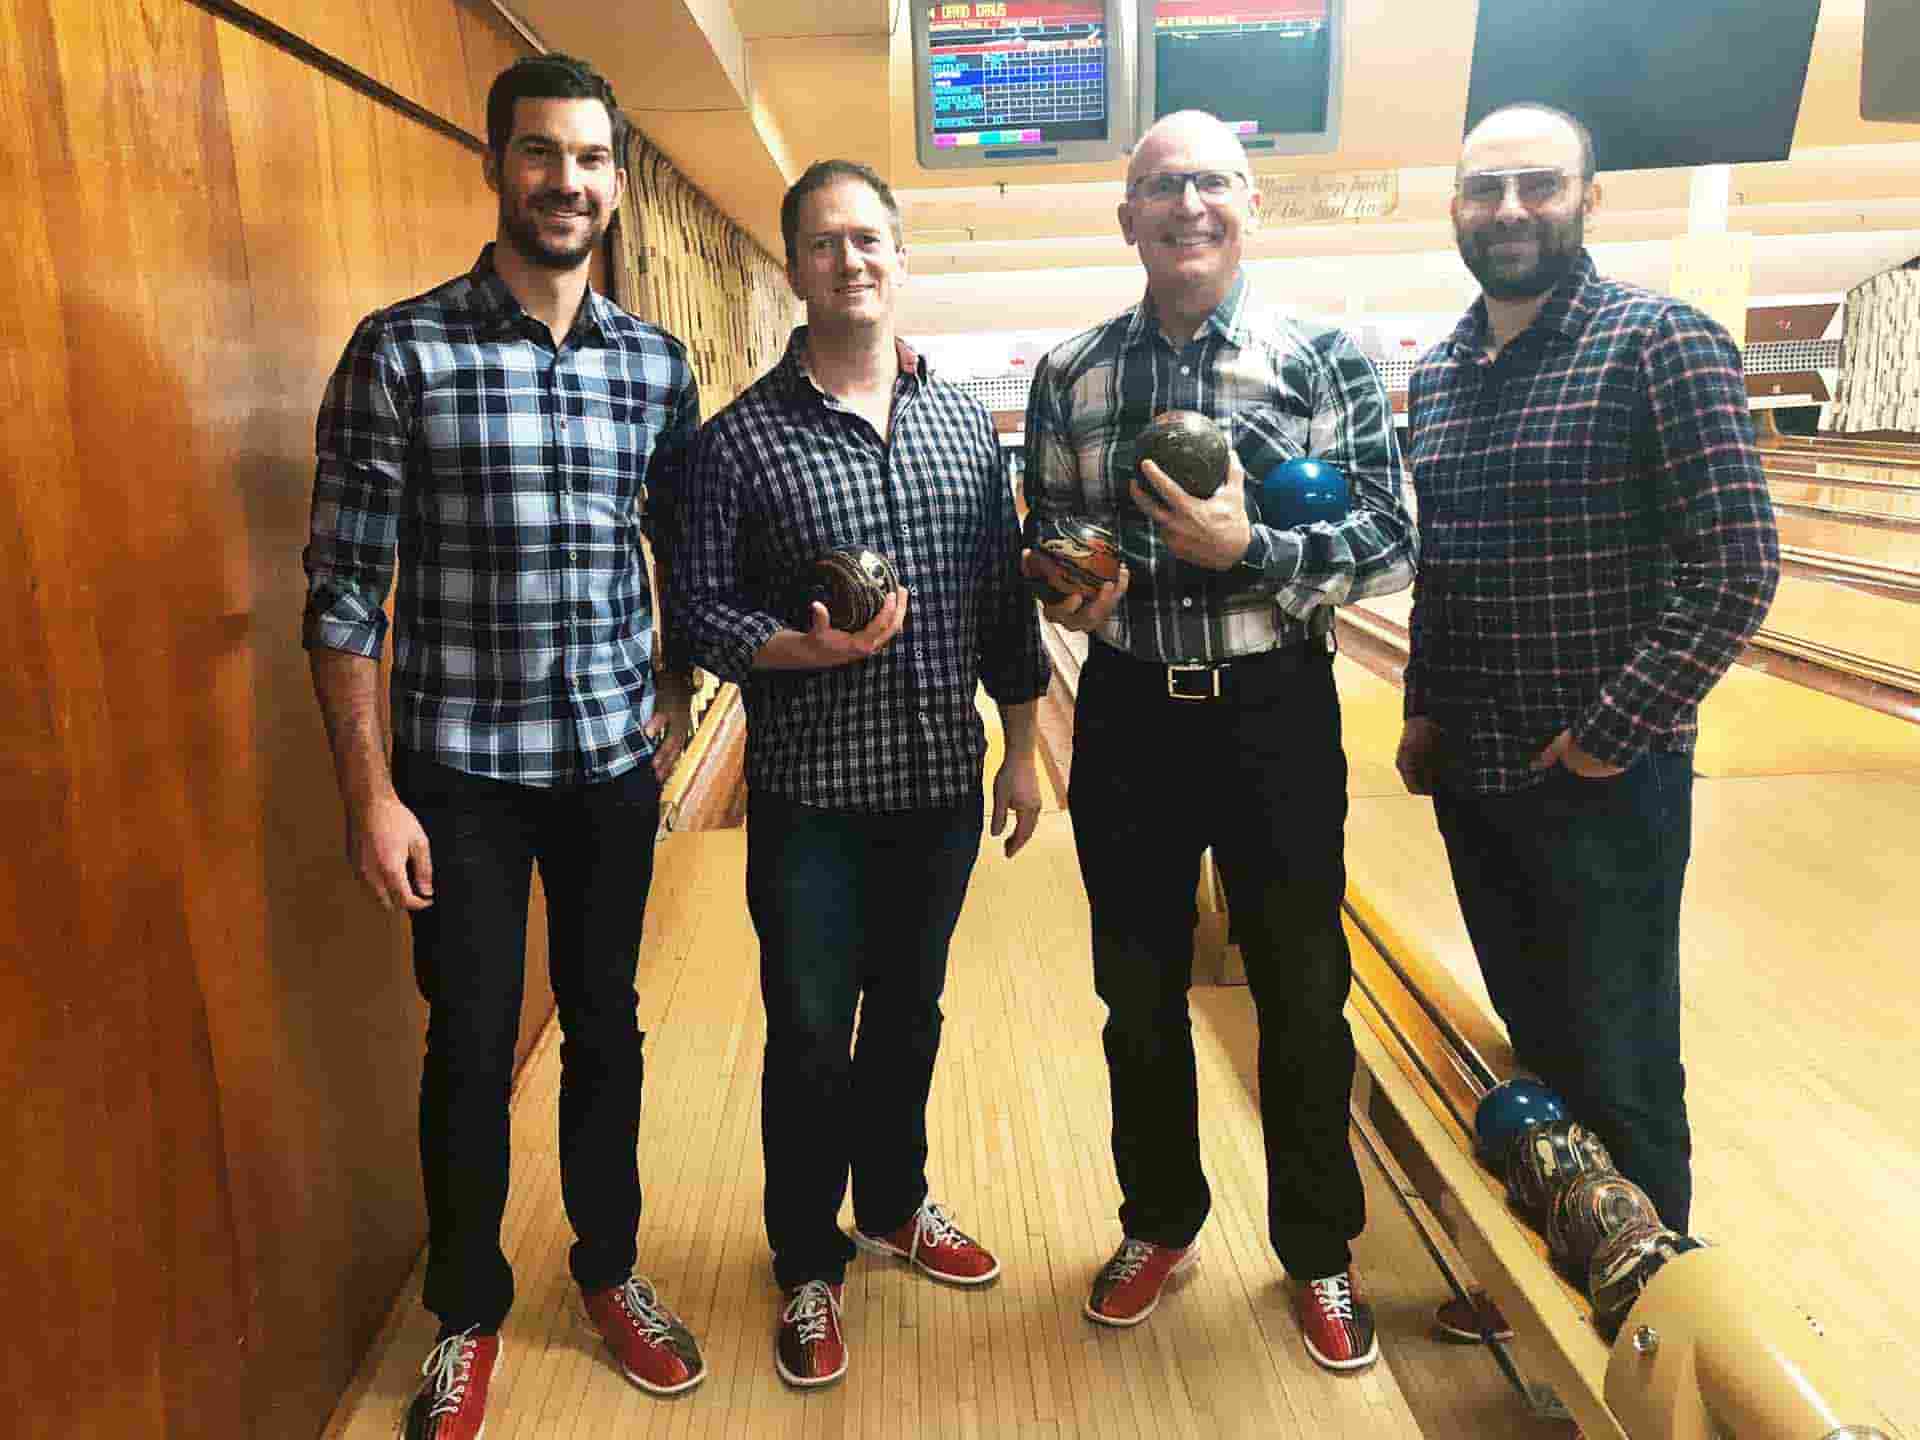 JLL team enjoying & getting clicked in a bowling arena